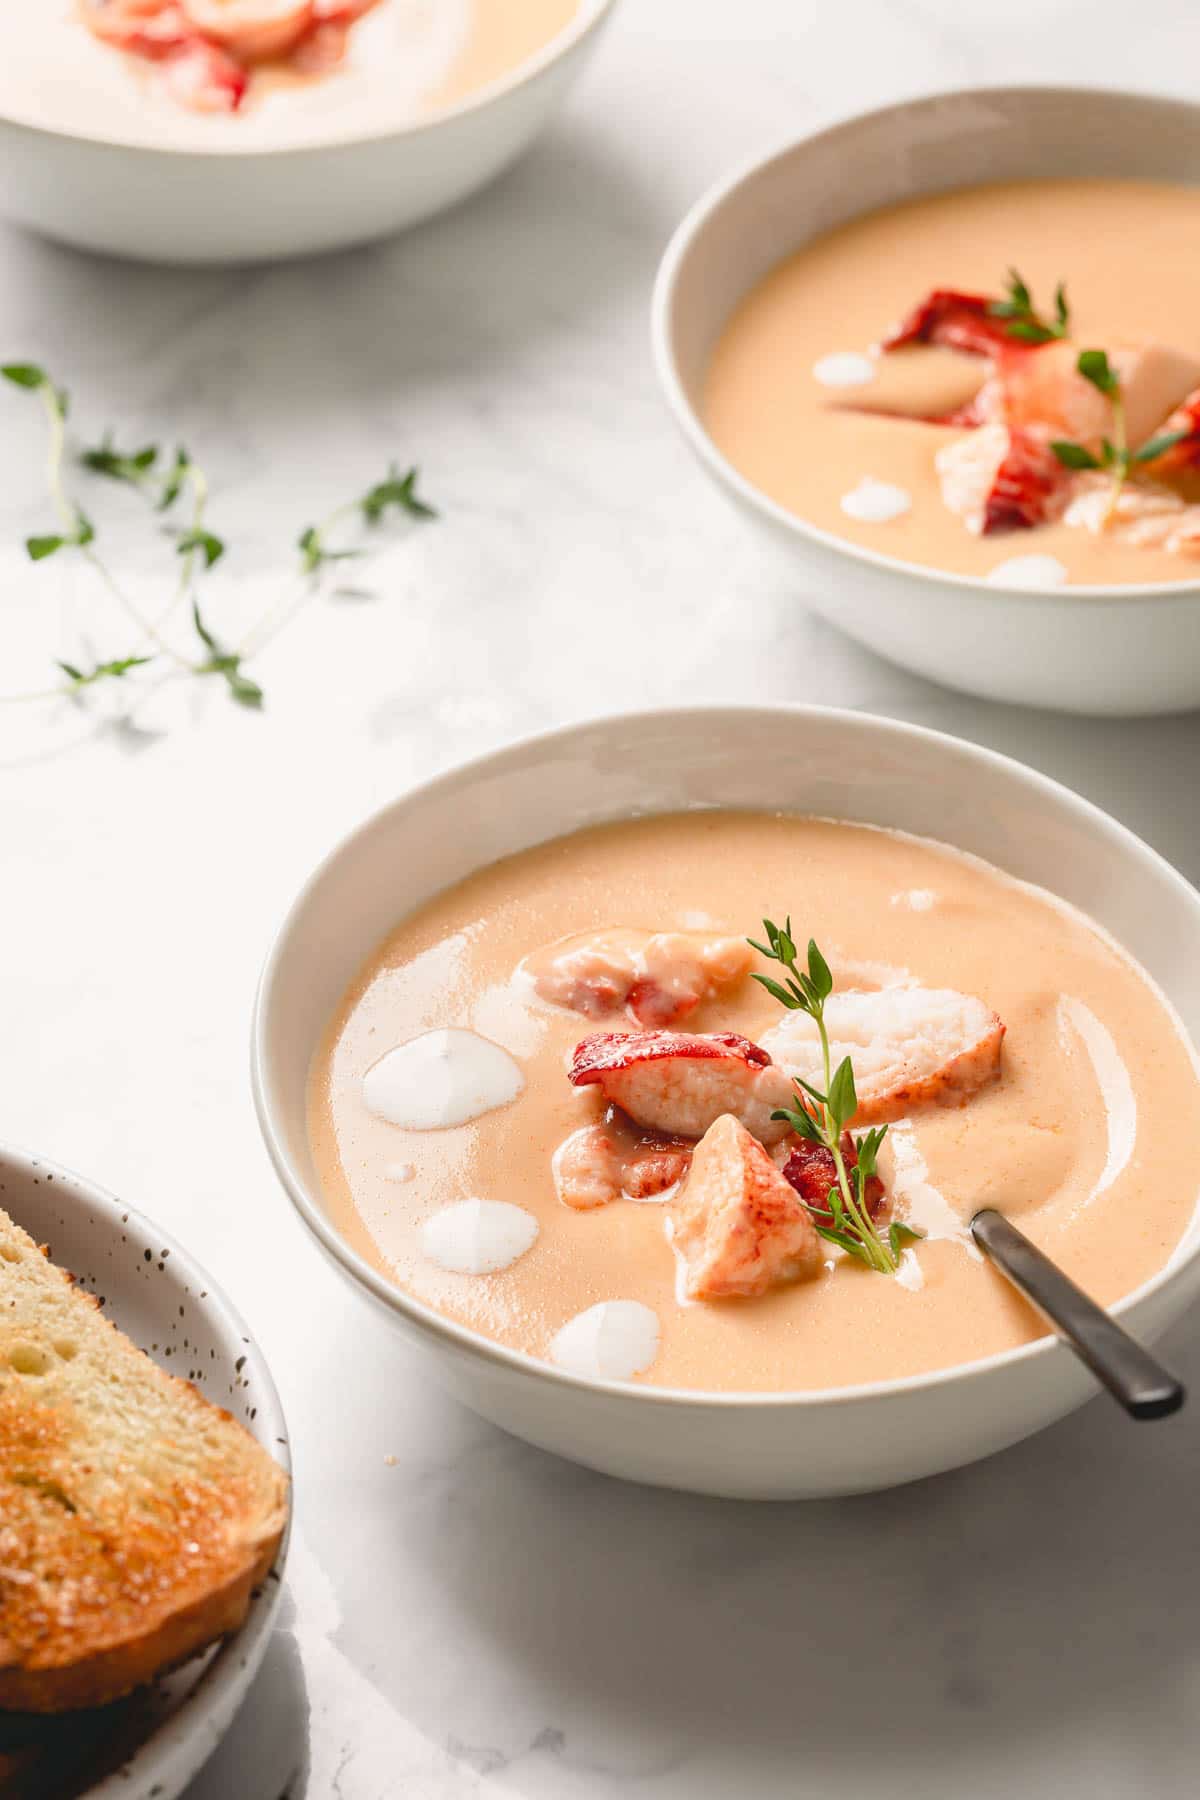 Creamy Seafood Bisque Recipe: How to Make It